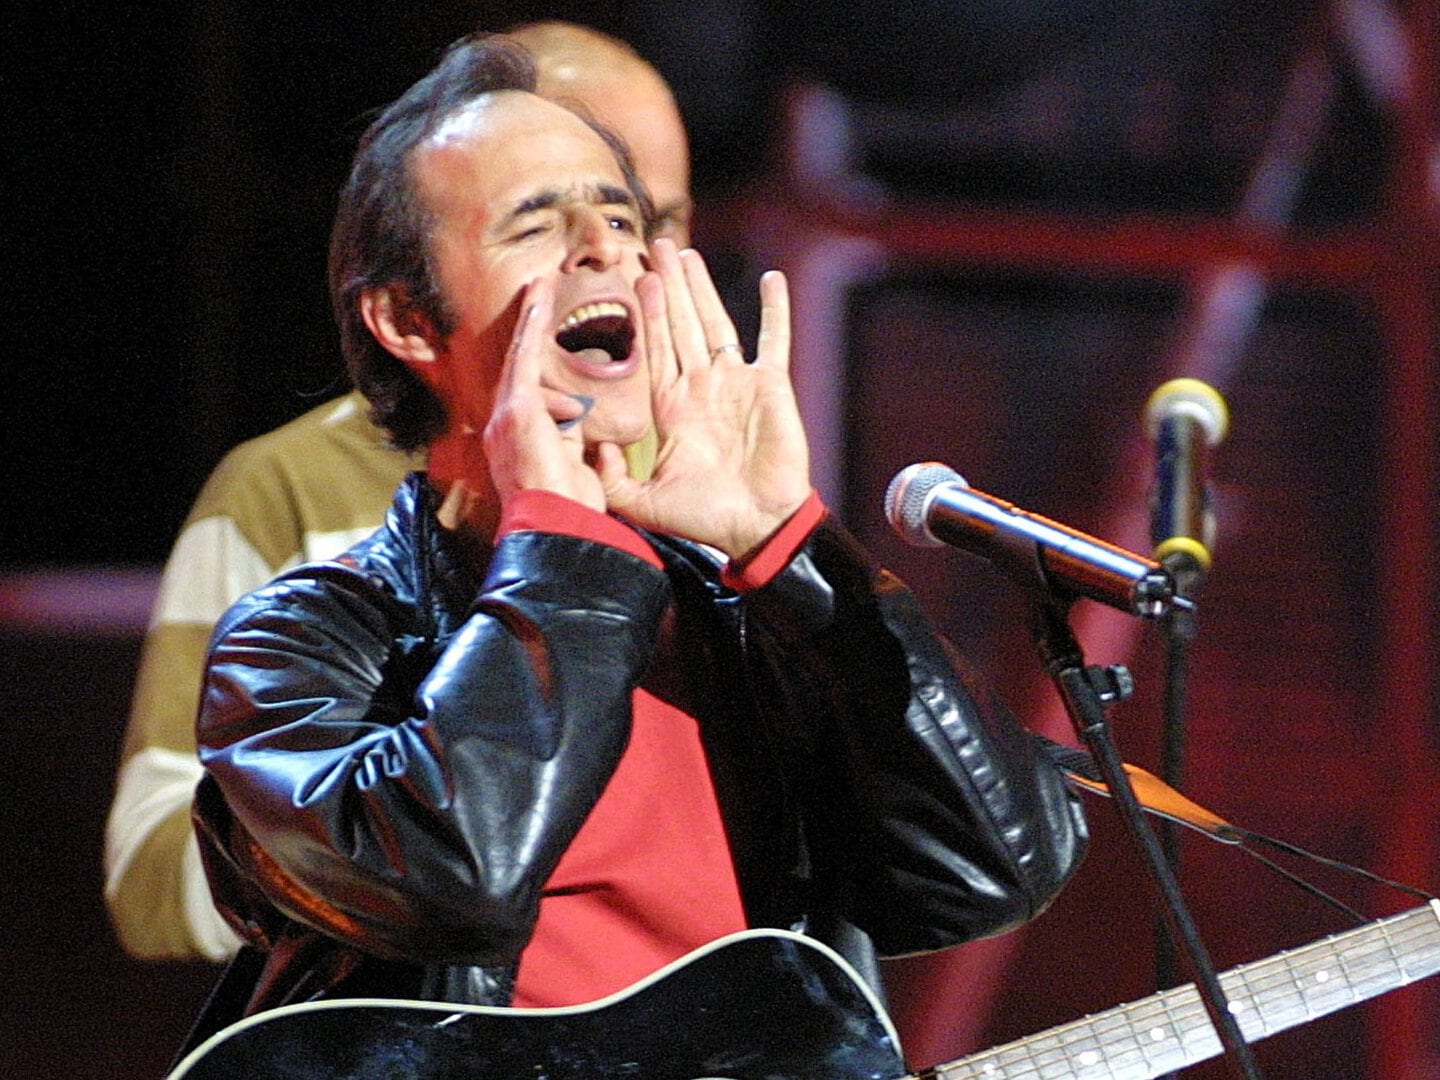 French singer Jean-Jacques Goldman jokes about an electrical failure during his performance at the NRJ music awards in Cannes January 19, 2002. - PBEAHUKVAEH